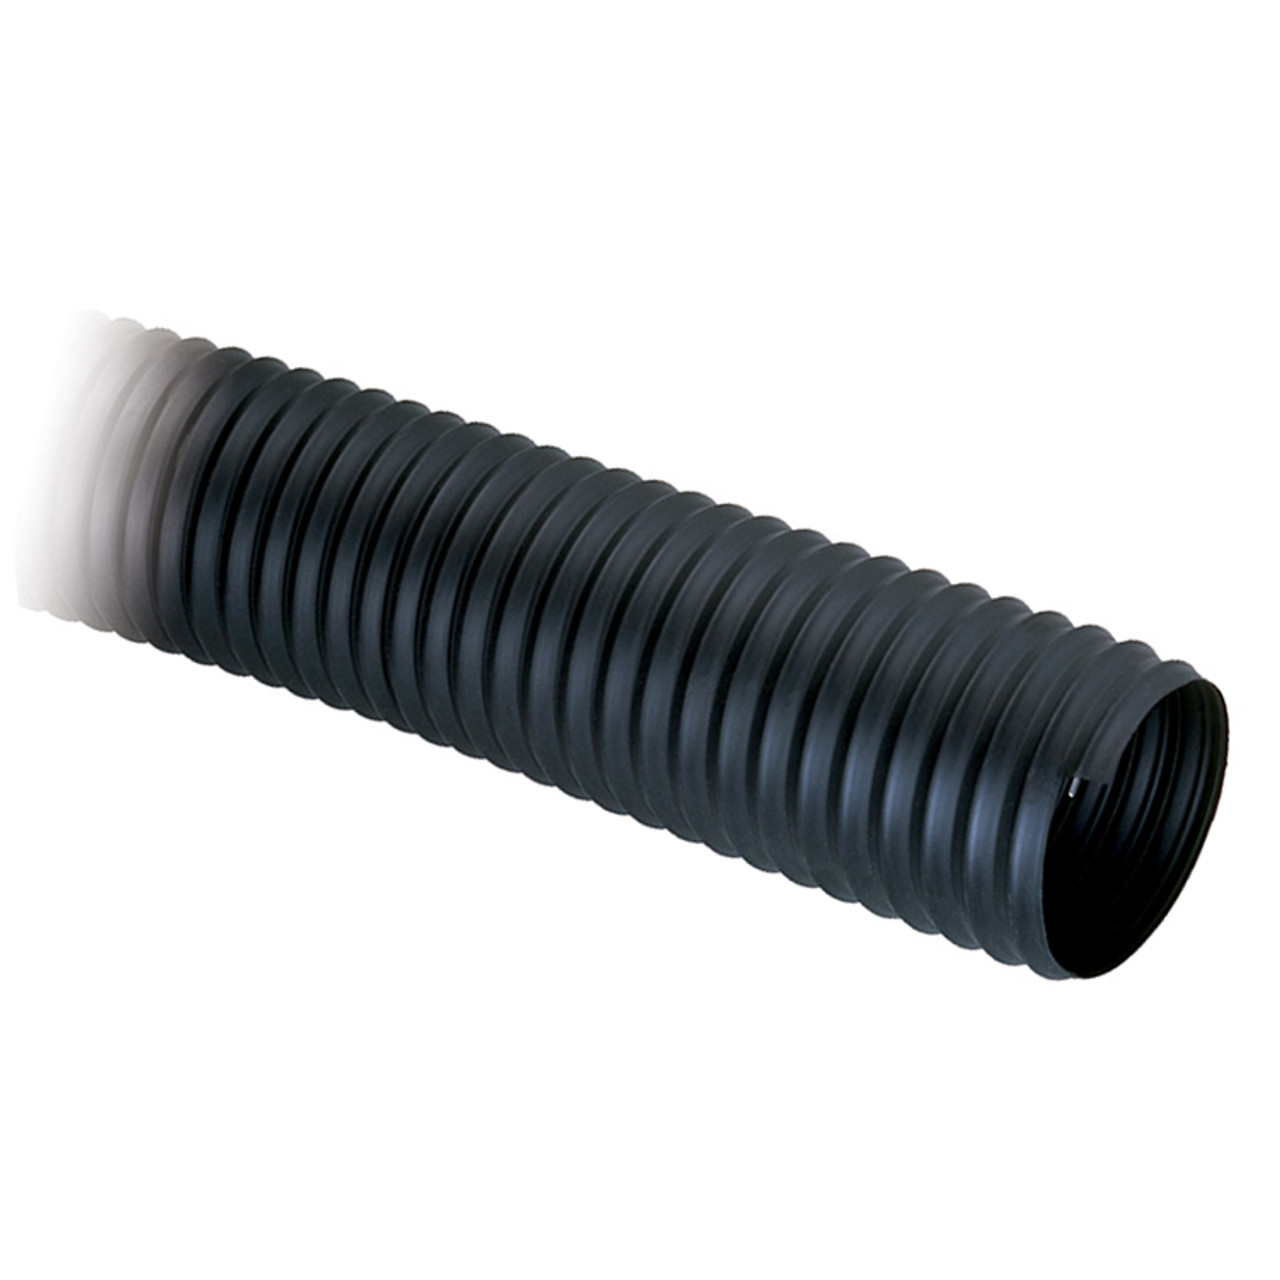 8" Thermoplastic Rubber Ducting Hose   TPR-800